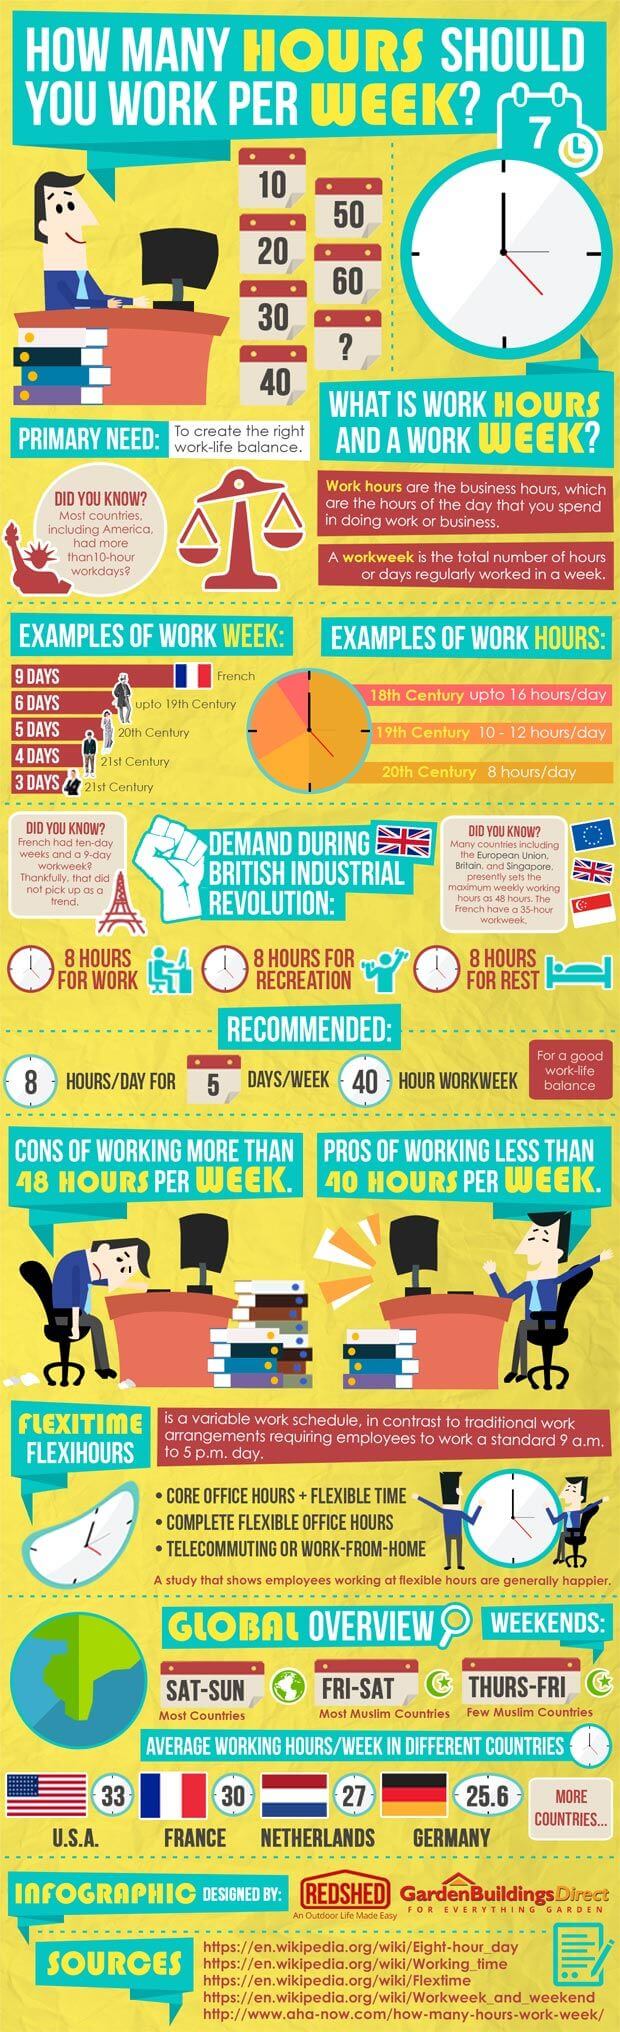 Infographic about work hours and life